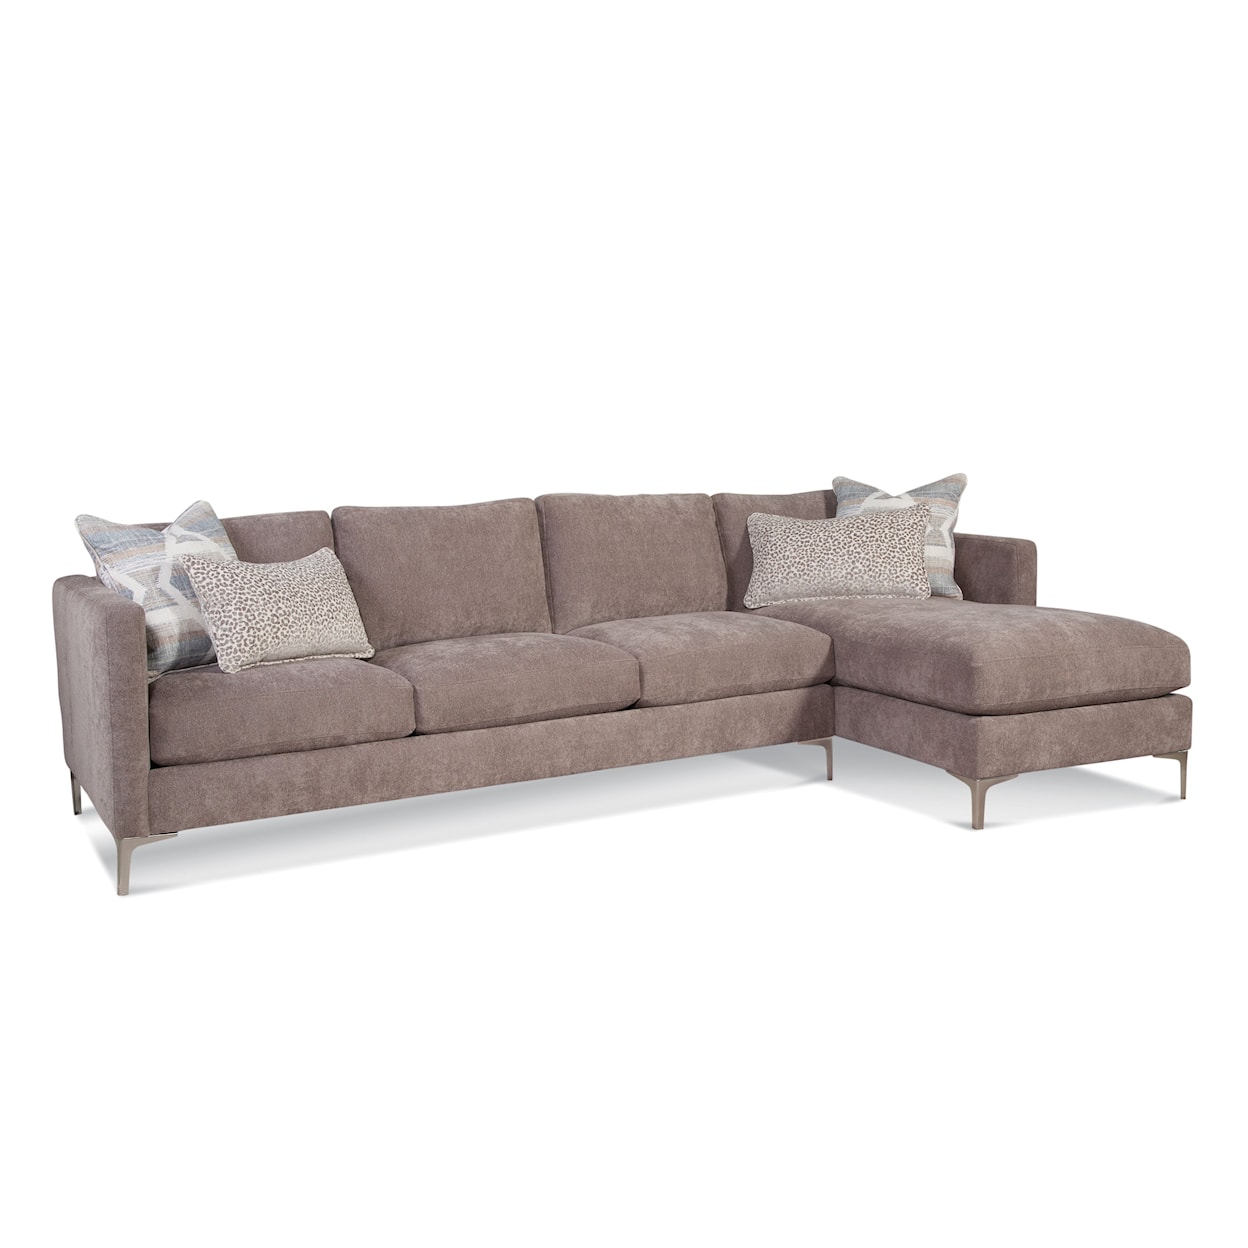 Braxton Culler Lenox 2-Piece Sectional Sofa with Metal Legs